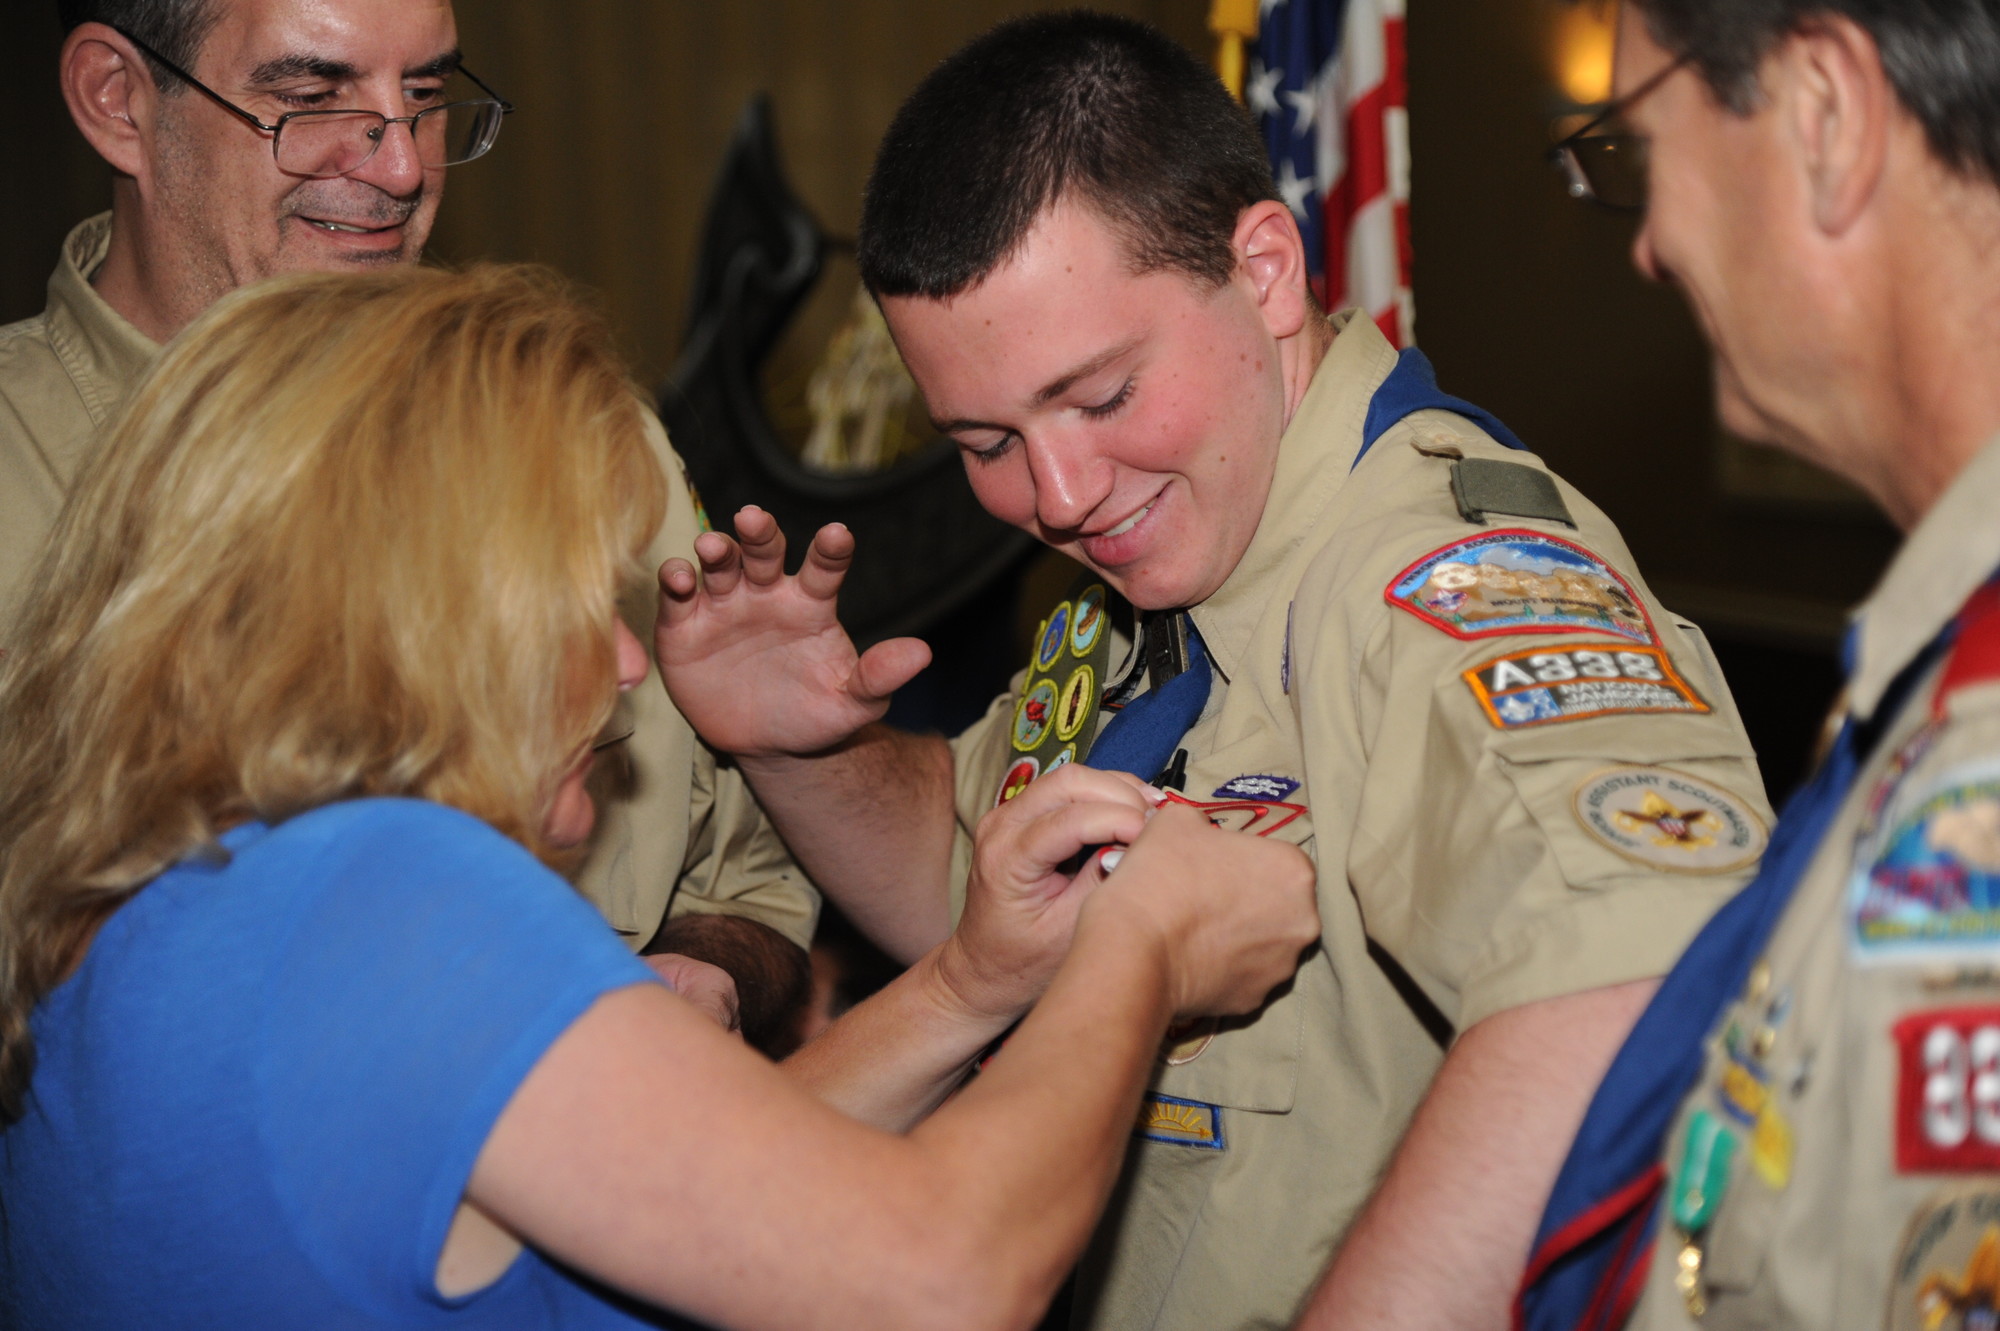 Alex Burns gets his eagle pinned on his shirt by his mom Marybeth while dad Robert watches